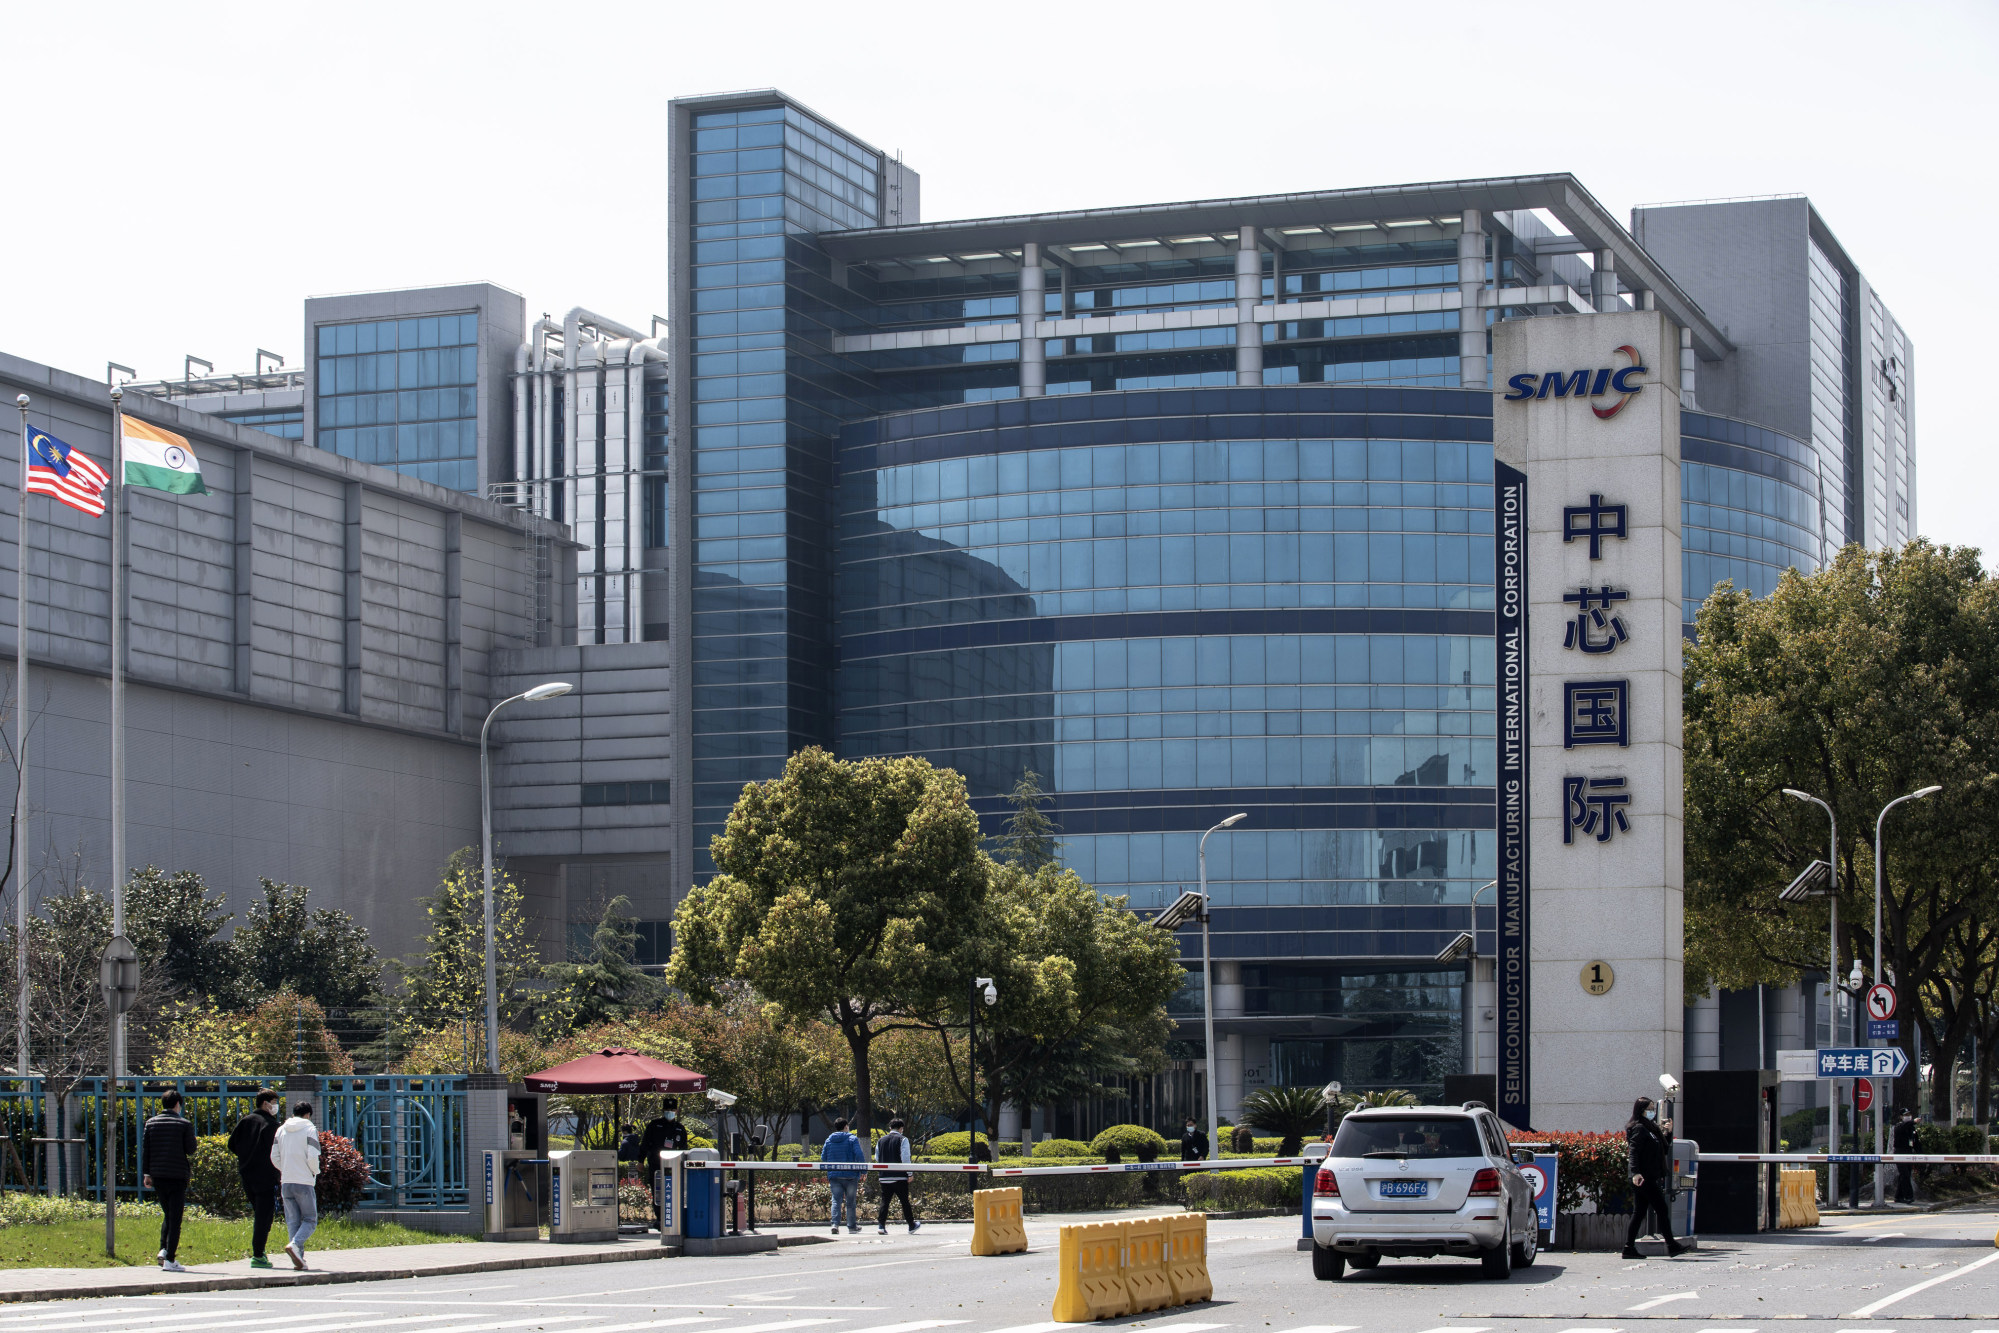  The image shows the headquarters of Semiconductor Manufacturing International Corporation (SMIC), a Chinese semiconductor company, with the US and Indian flags flying outside. The image represents the search query 'US export licenses for Huawei and SMIC' because both companies have faced scrutiny from the US government over their alleged ties to the Chinese military.